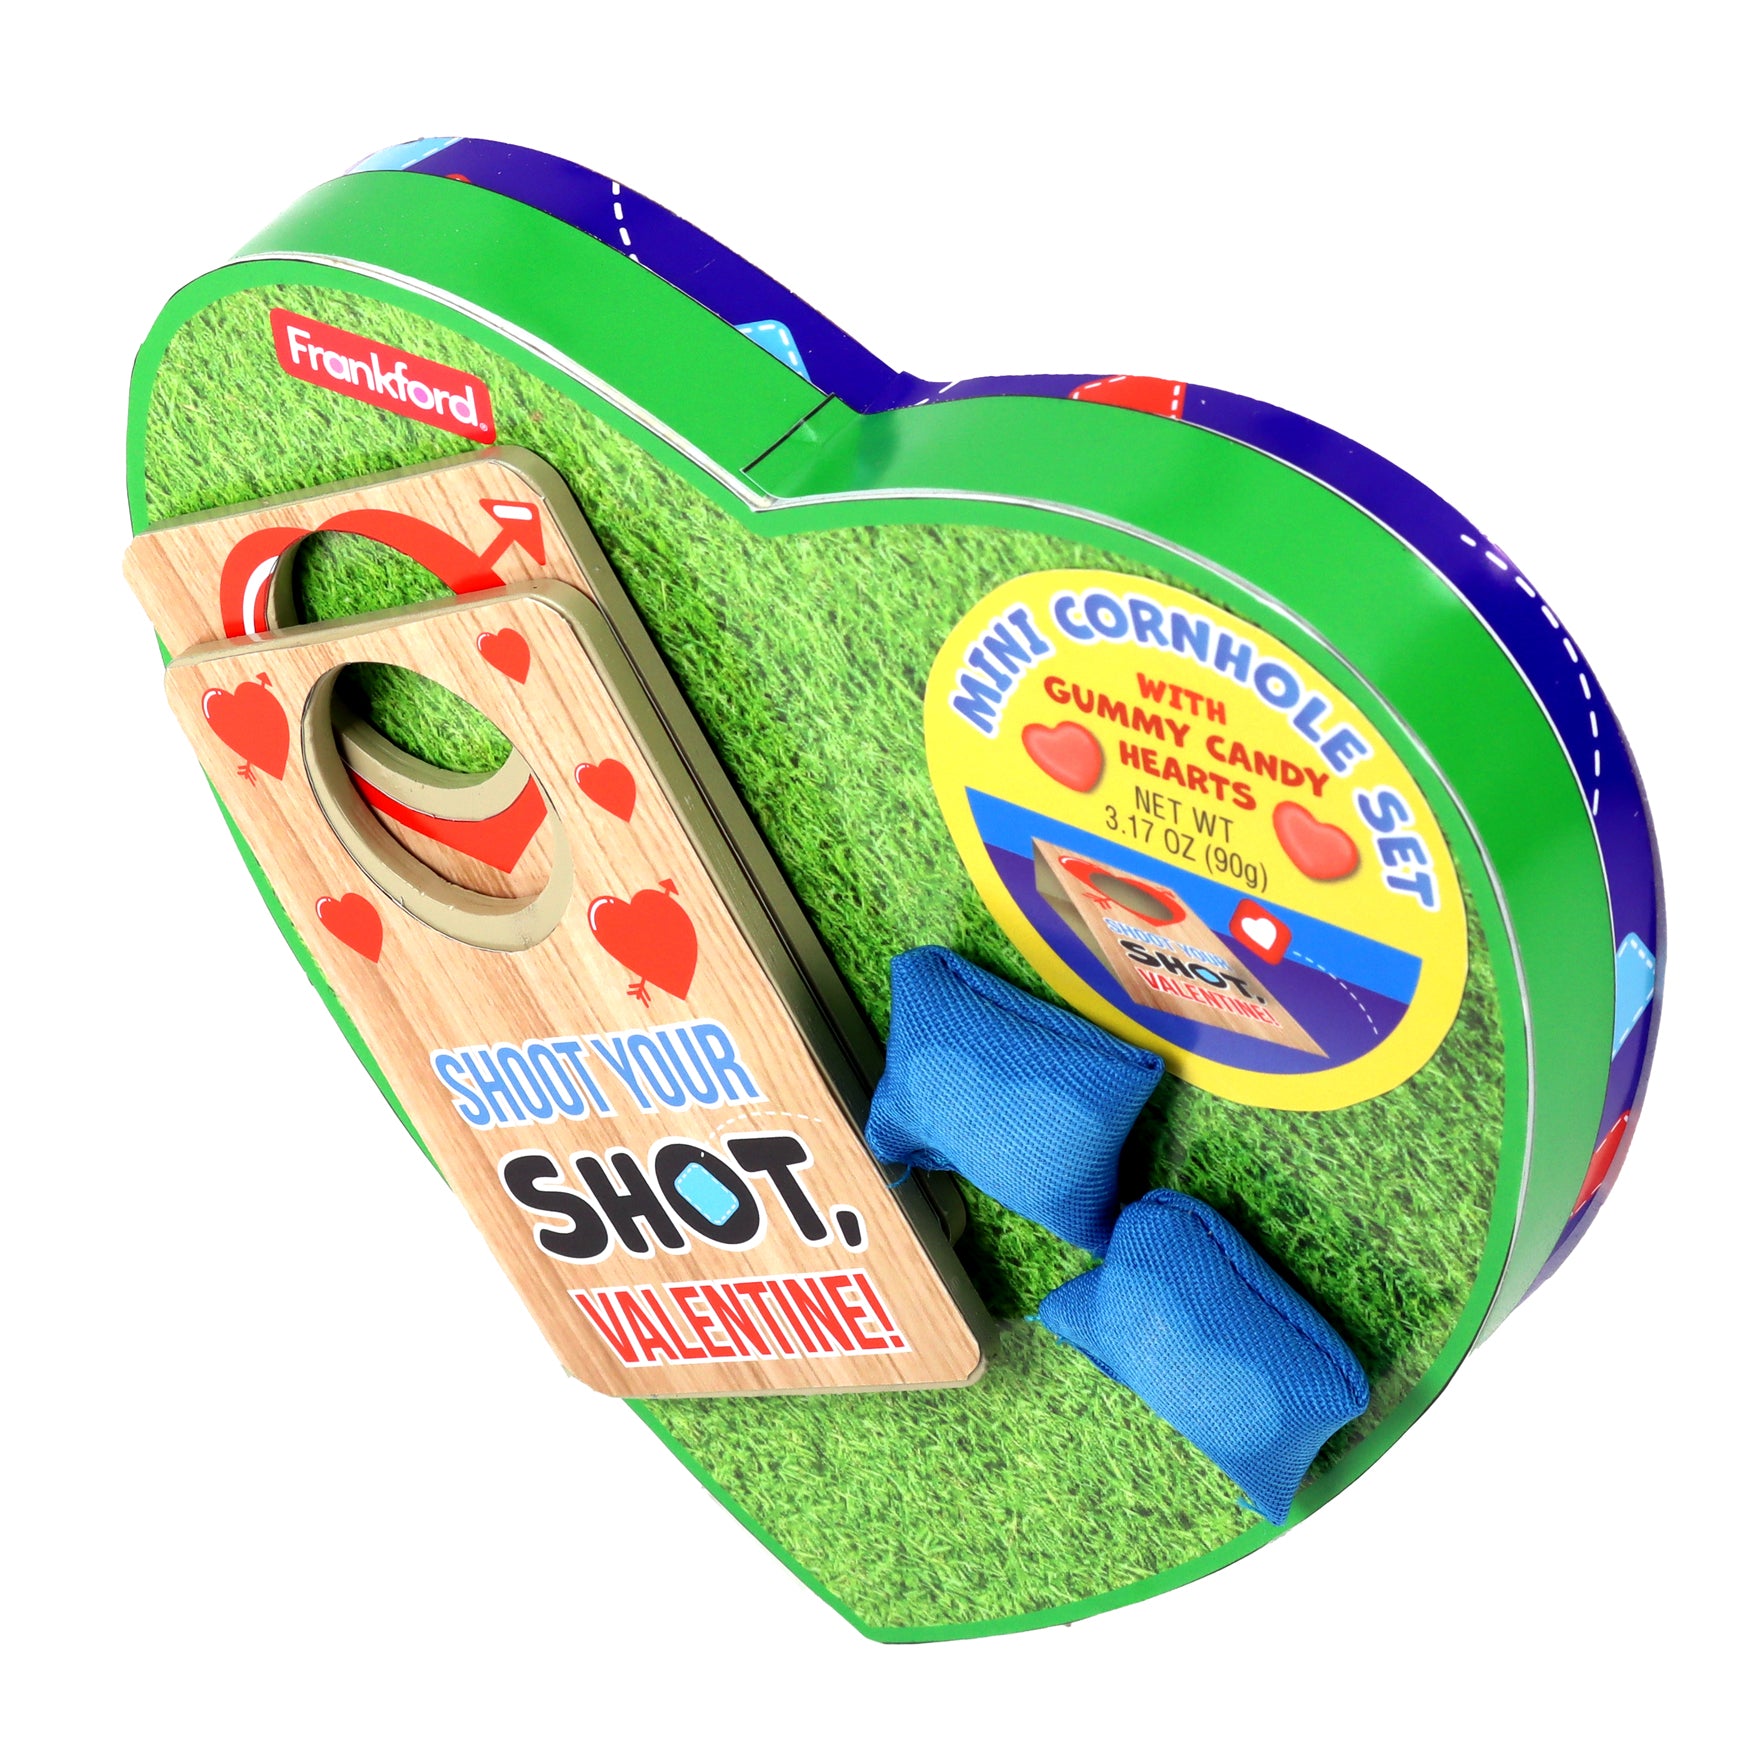 Top right view of a green heart shaped box with a mini corn hole set on the front